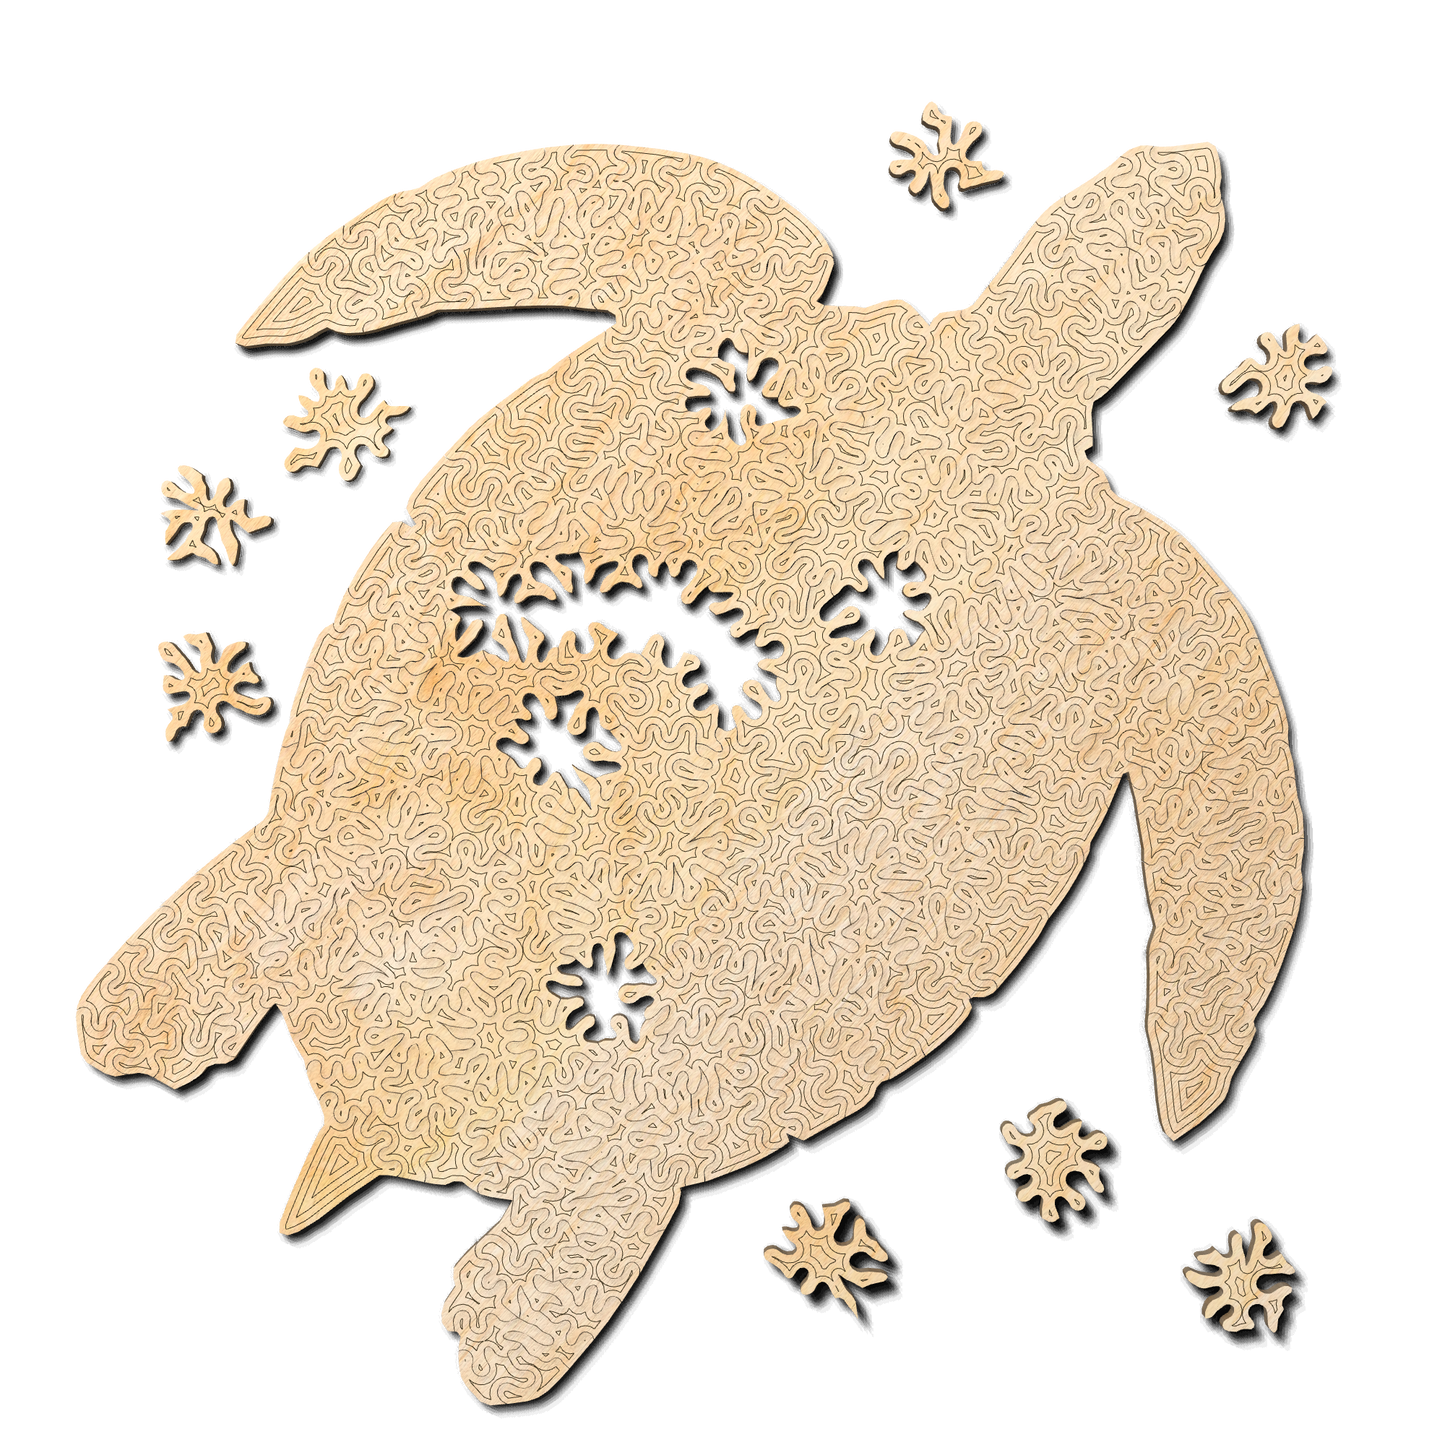 Sea turtle | Wooden Puzzle | Chaos series - 200 pieces